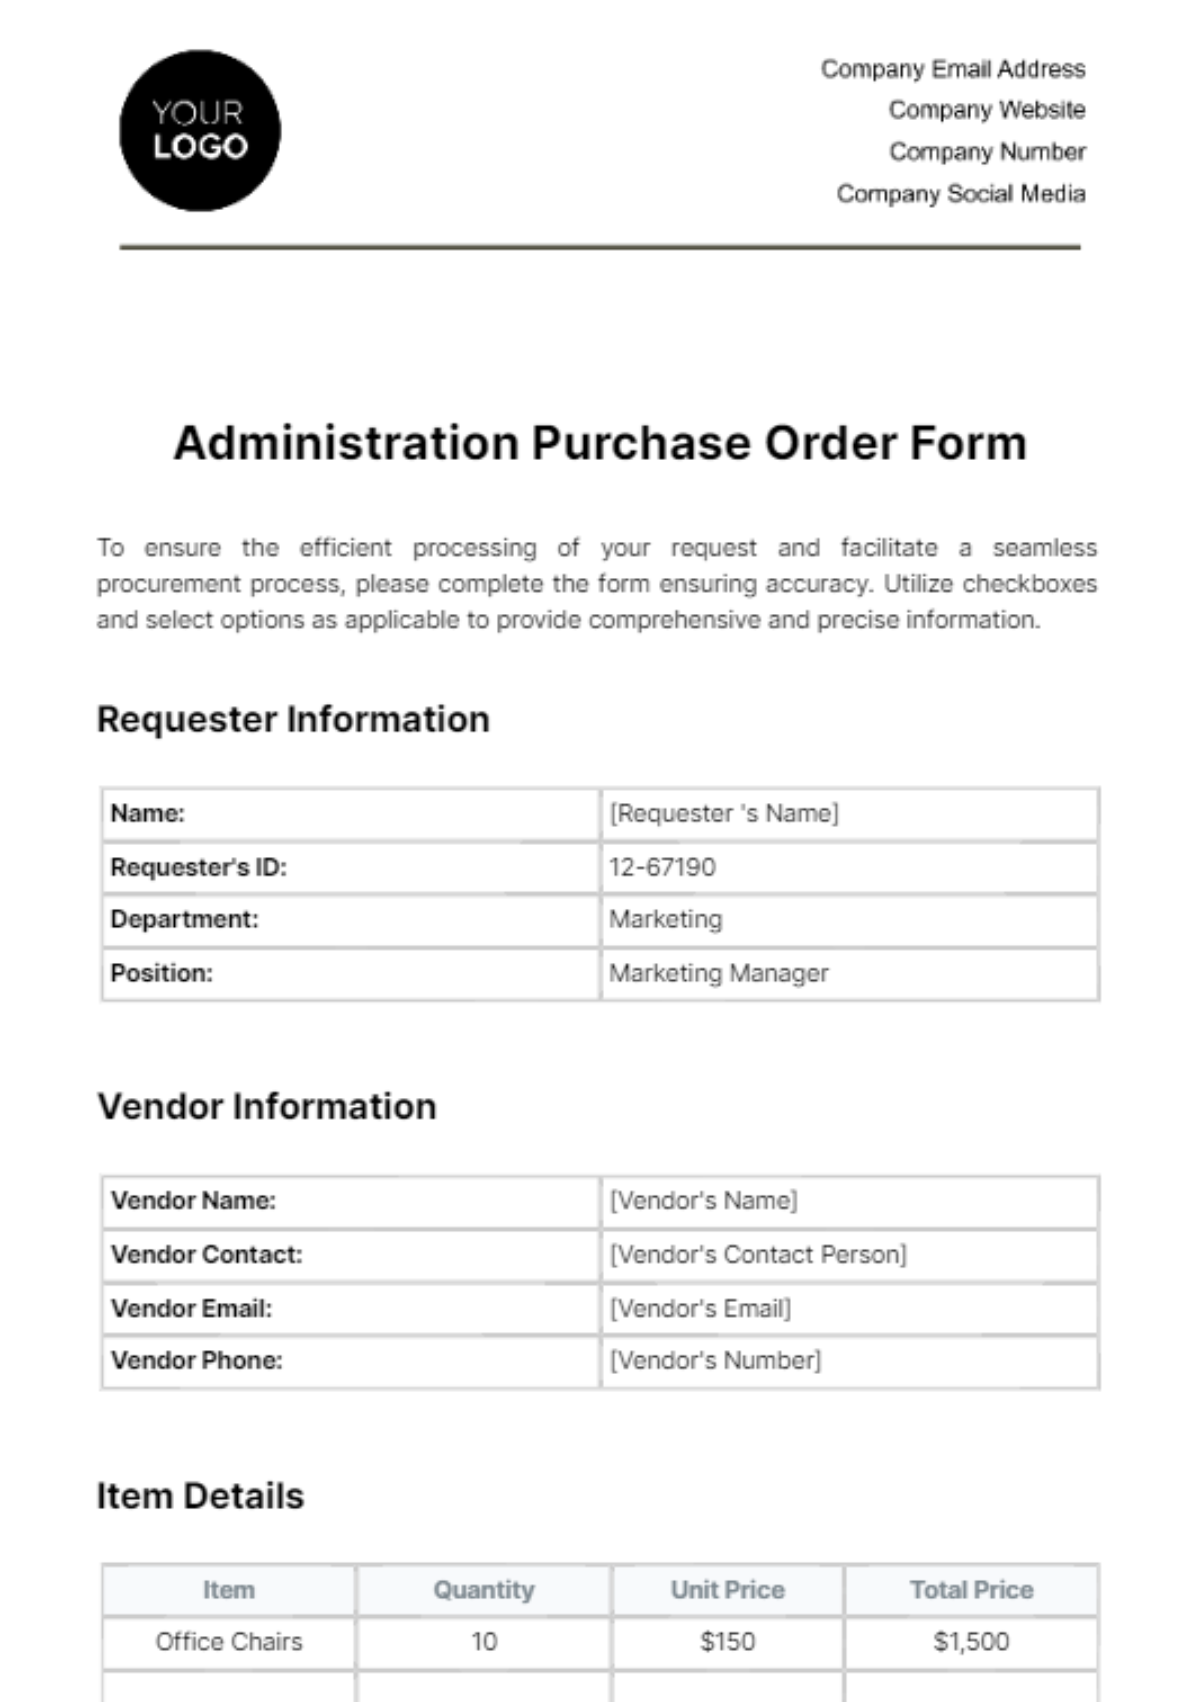 Administration Purchase Order Form Template